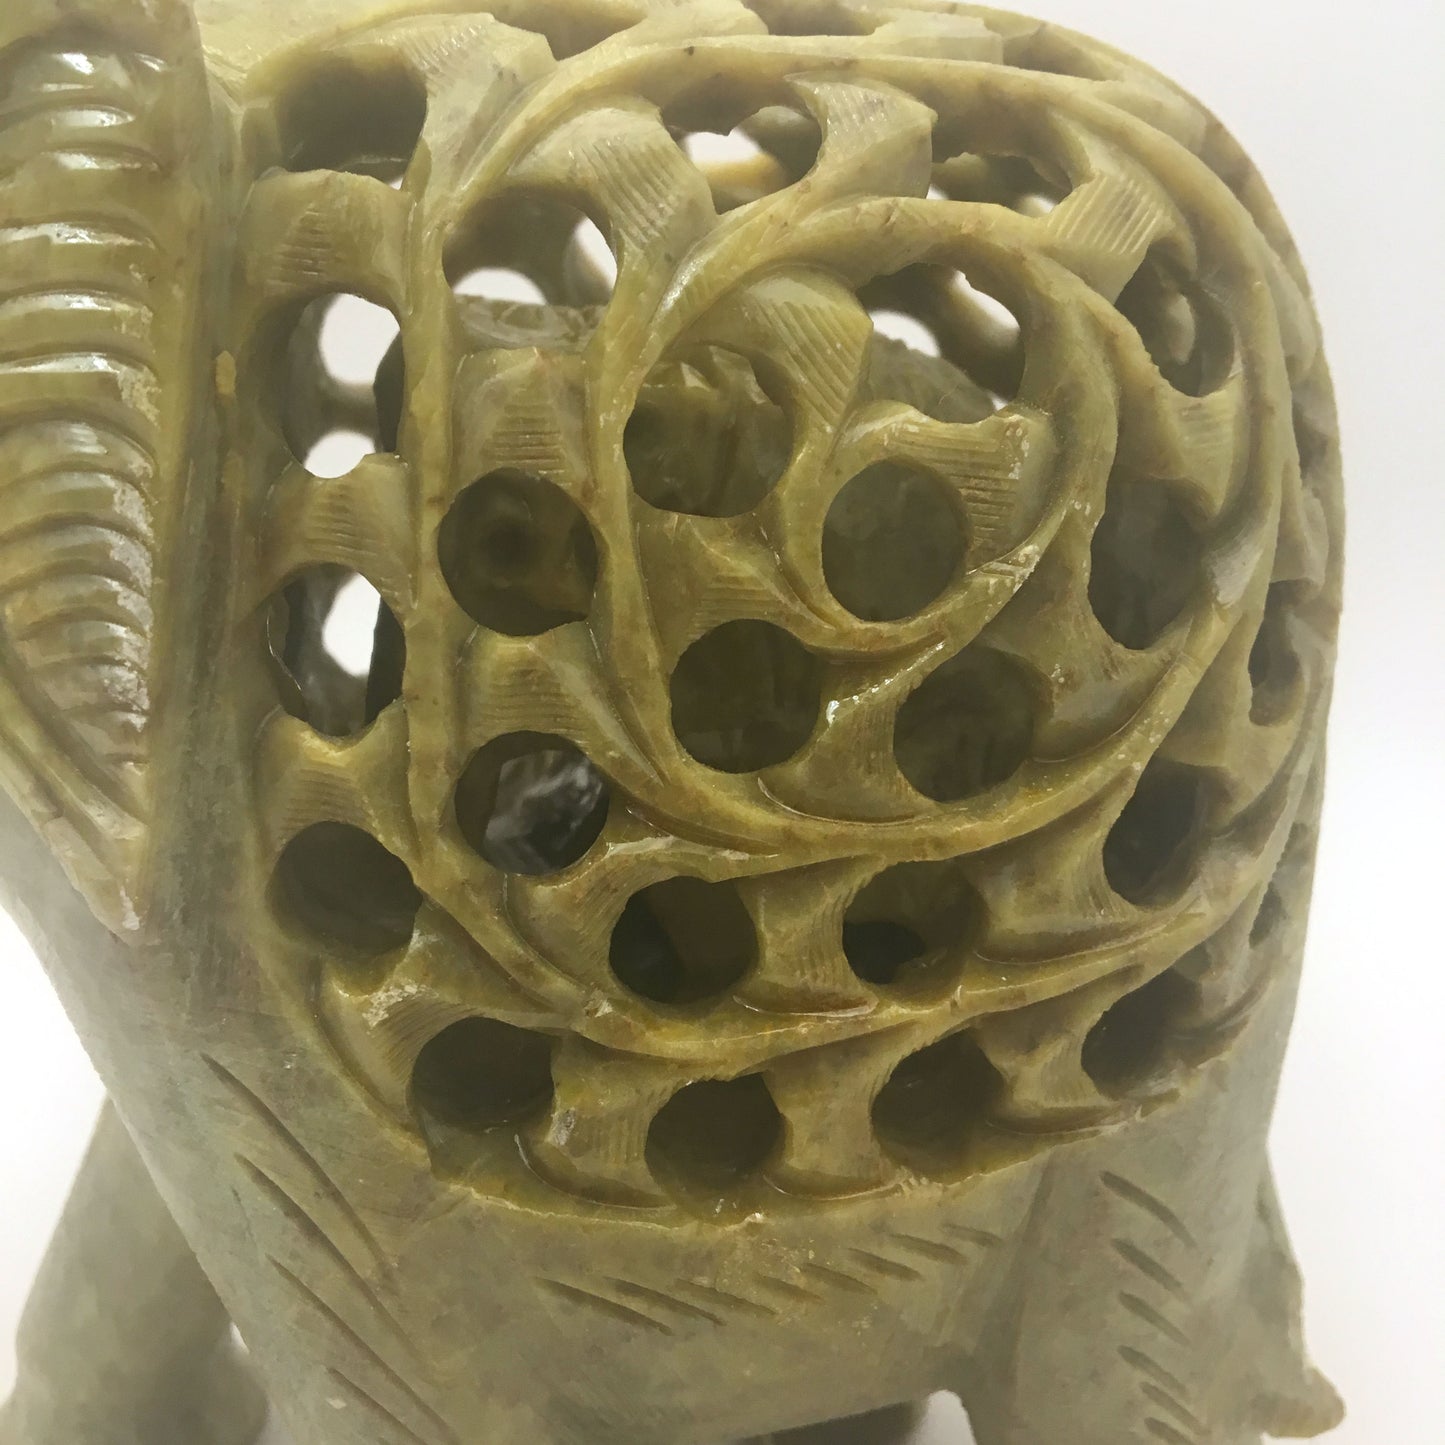 Soapstone Elephant Statue Figure with Inside Baby Elephant Handcrafted - Green